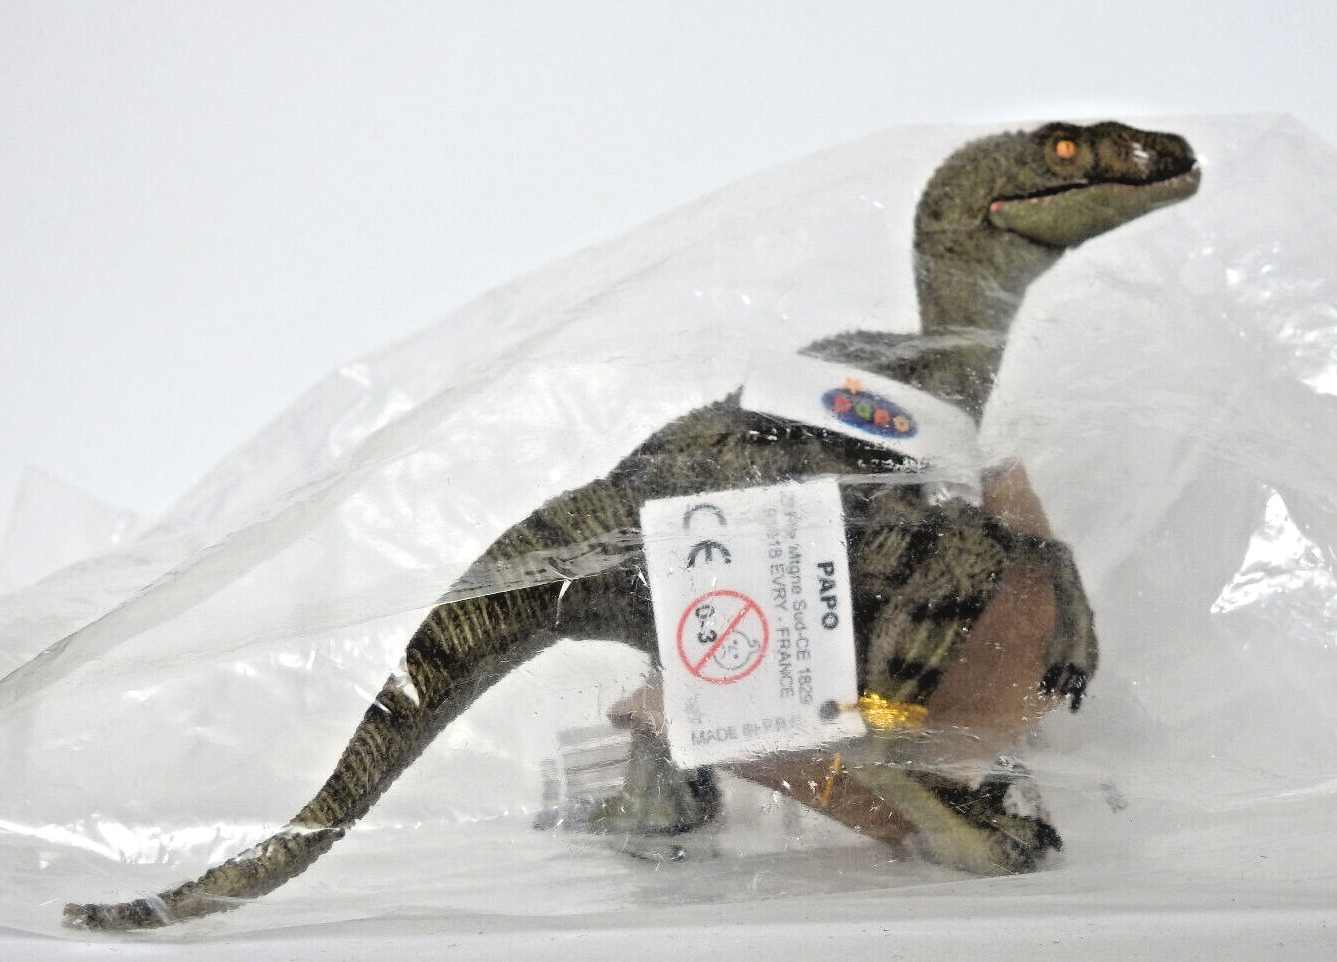 Papo 55058 Green Velociraptor w. Opening Jaw, Brand-New Factory Sealed Packaging